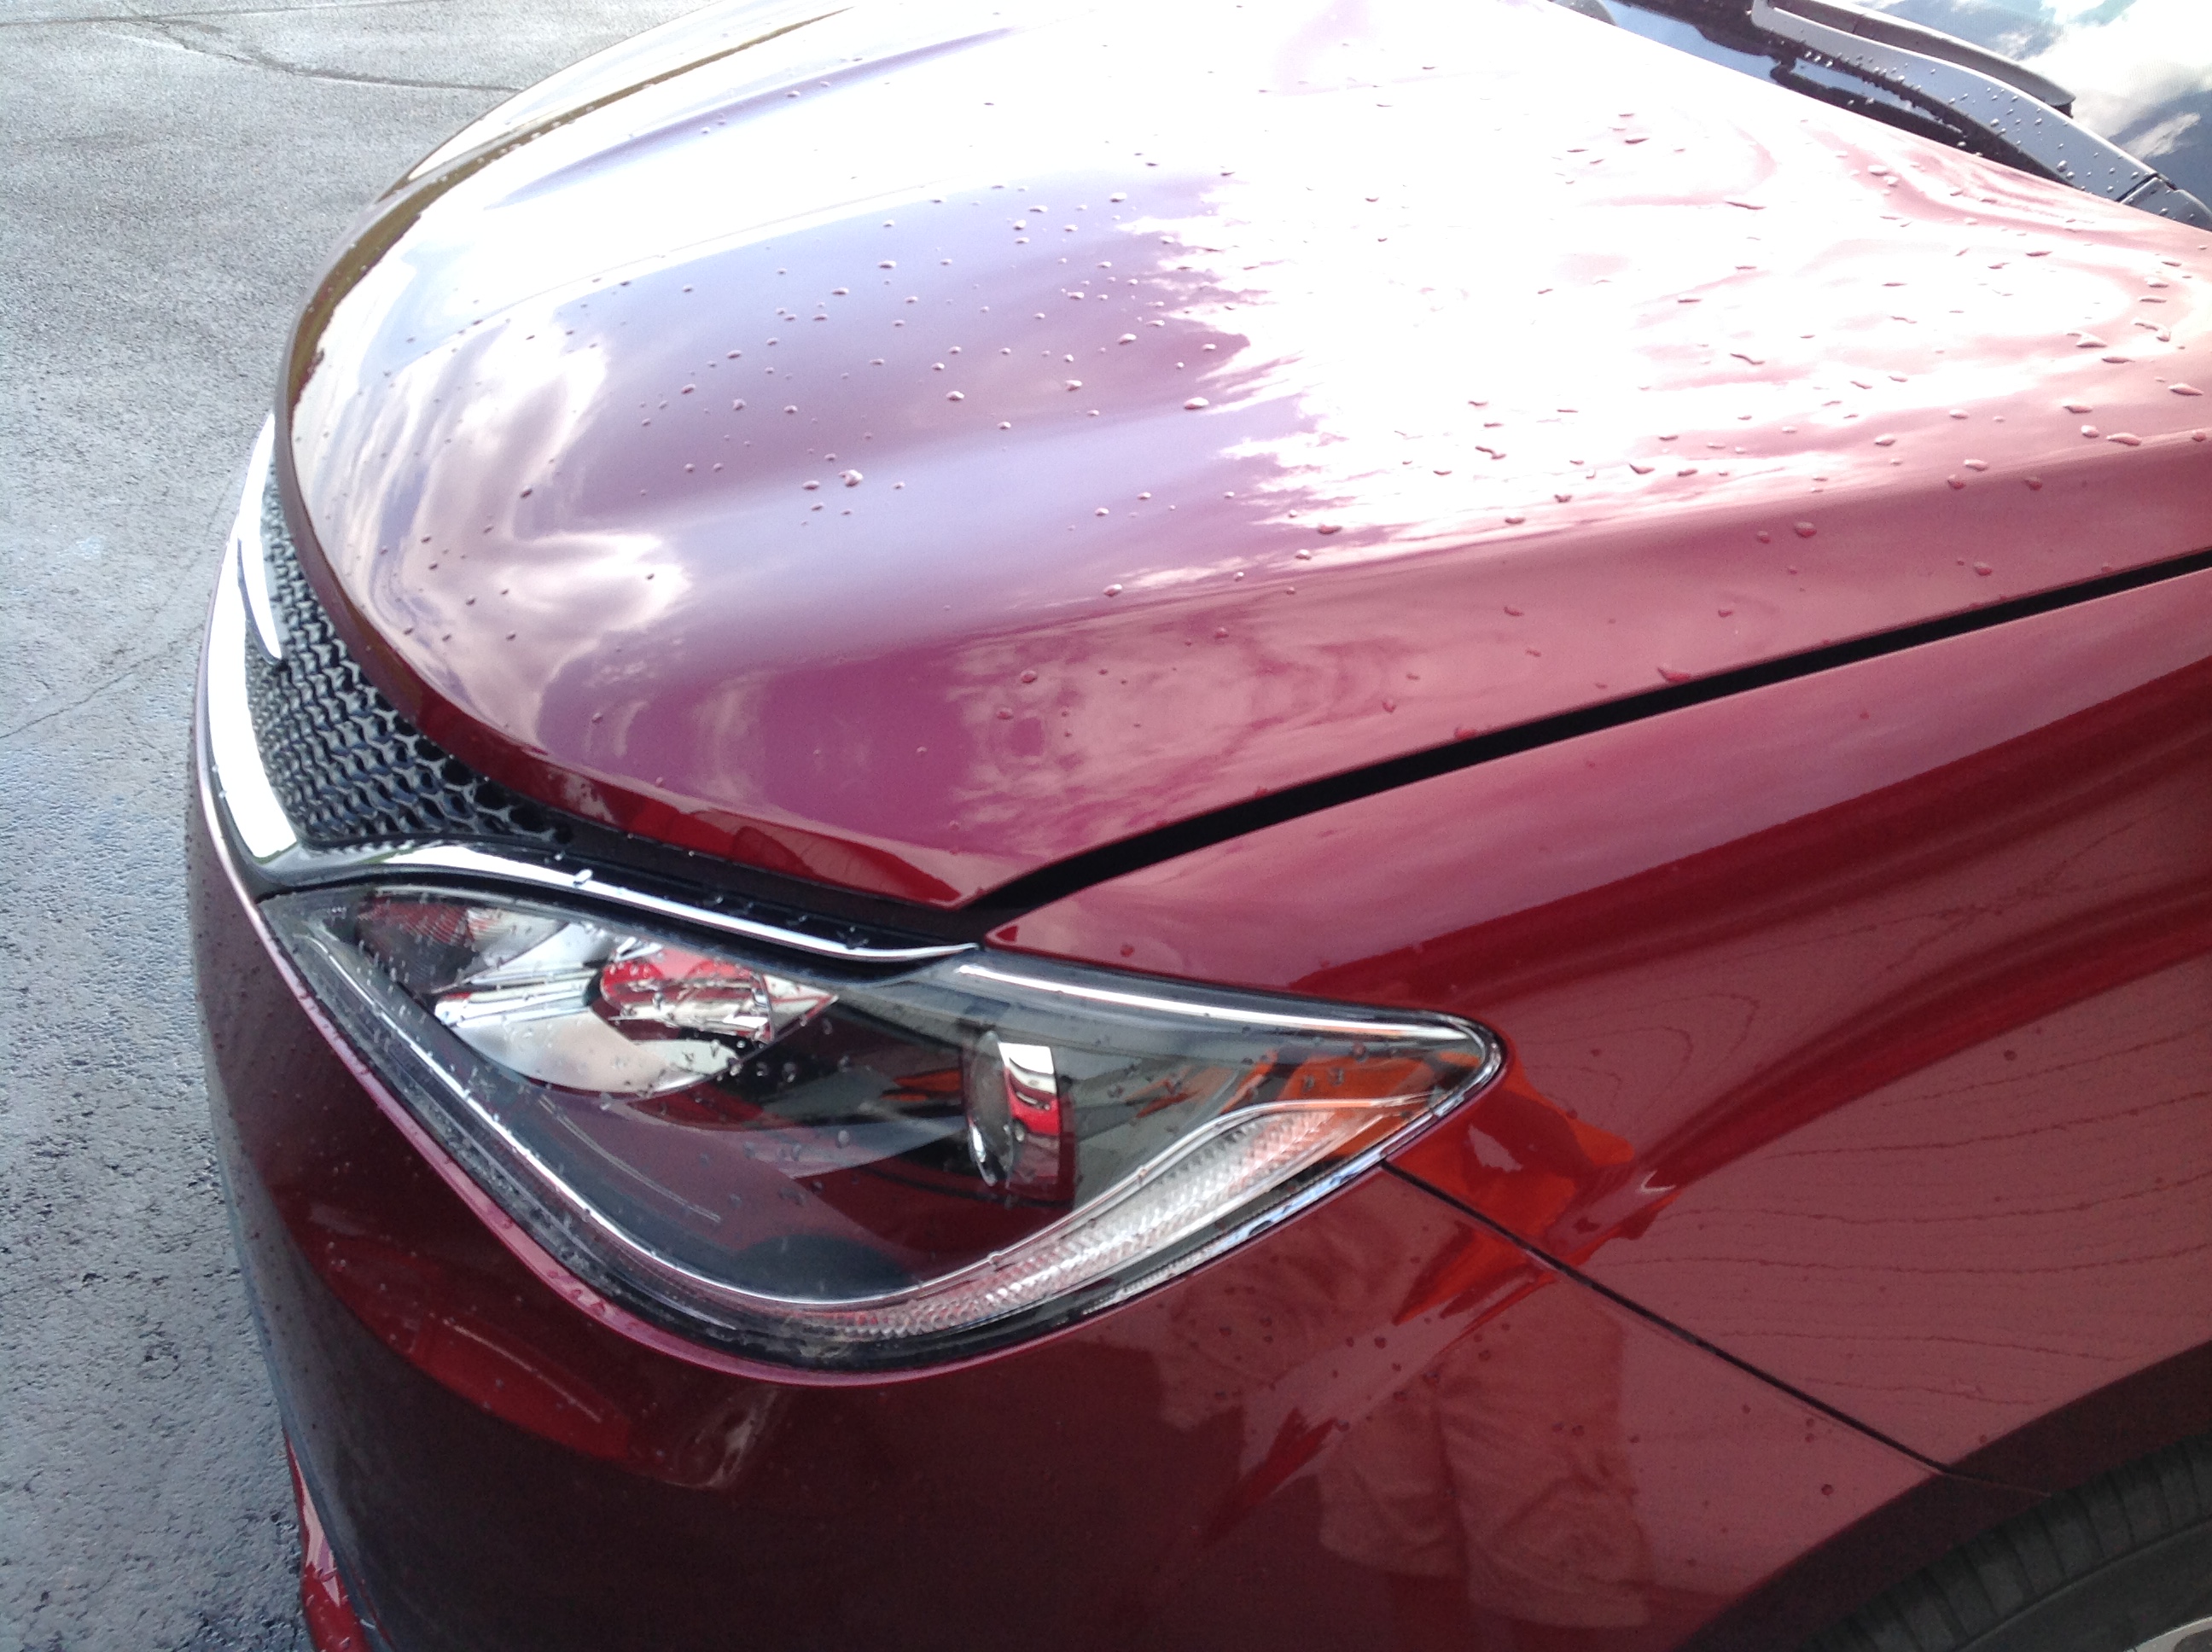 http://217Dent.com 2017 Chrysler Pacifica Aluminum Hood, PDR Factory Access to outter Skin, Excellent design, with an addition of extra body lines in the design. Springfield, IL Paintless Dent Repair Expert Michael Bocek